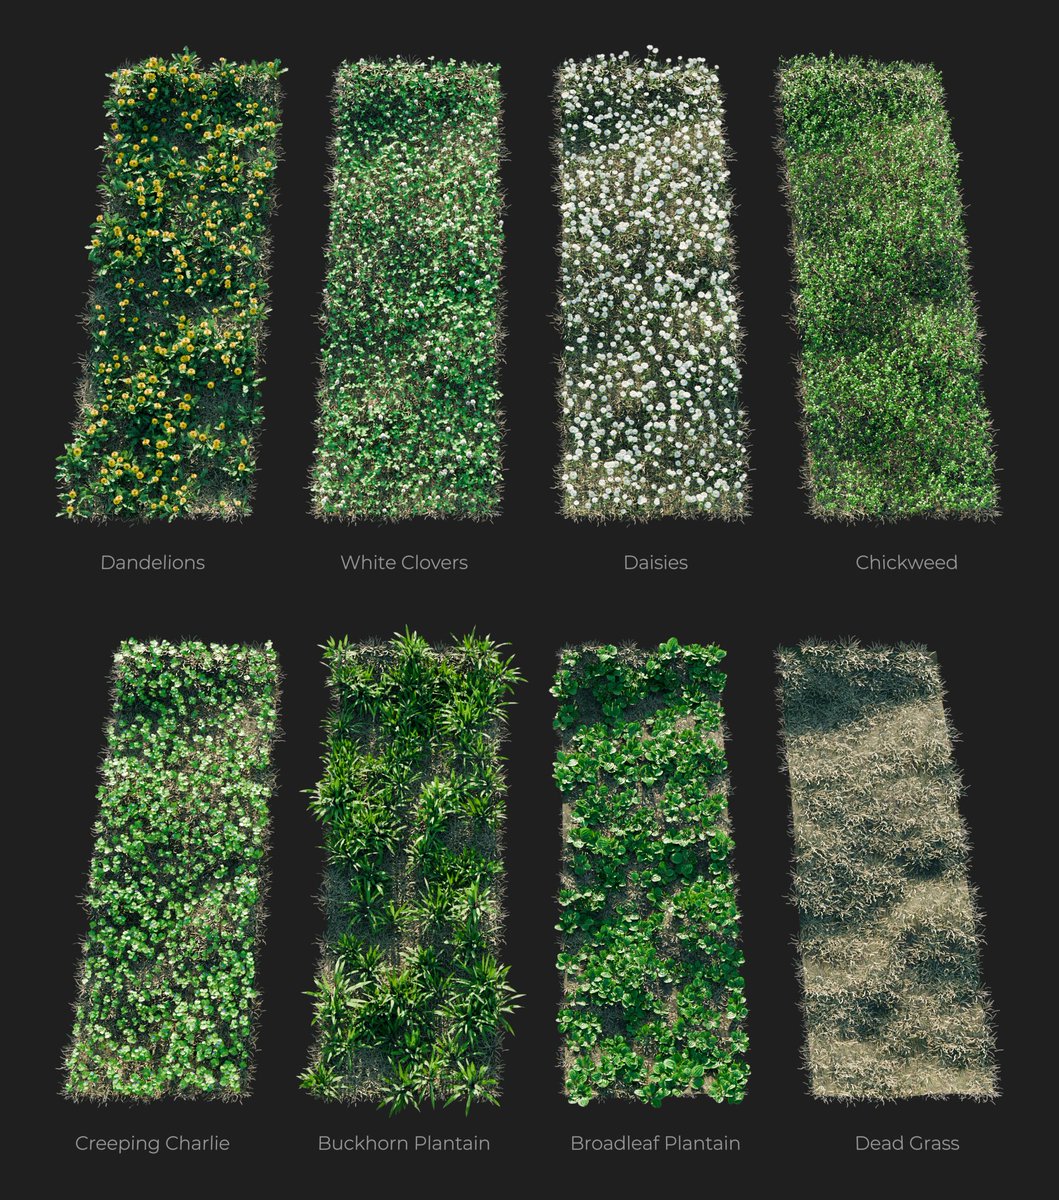 Next-gen Weeds are coming as well...
#b3d #geometrynodes